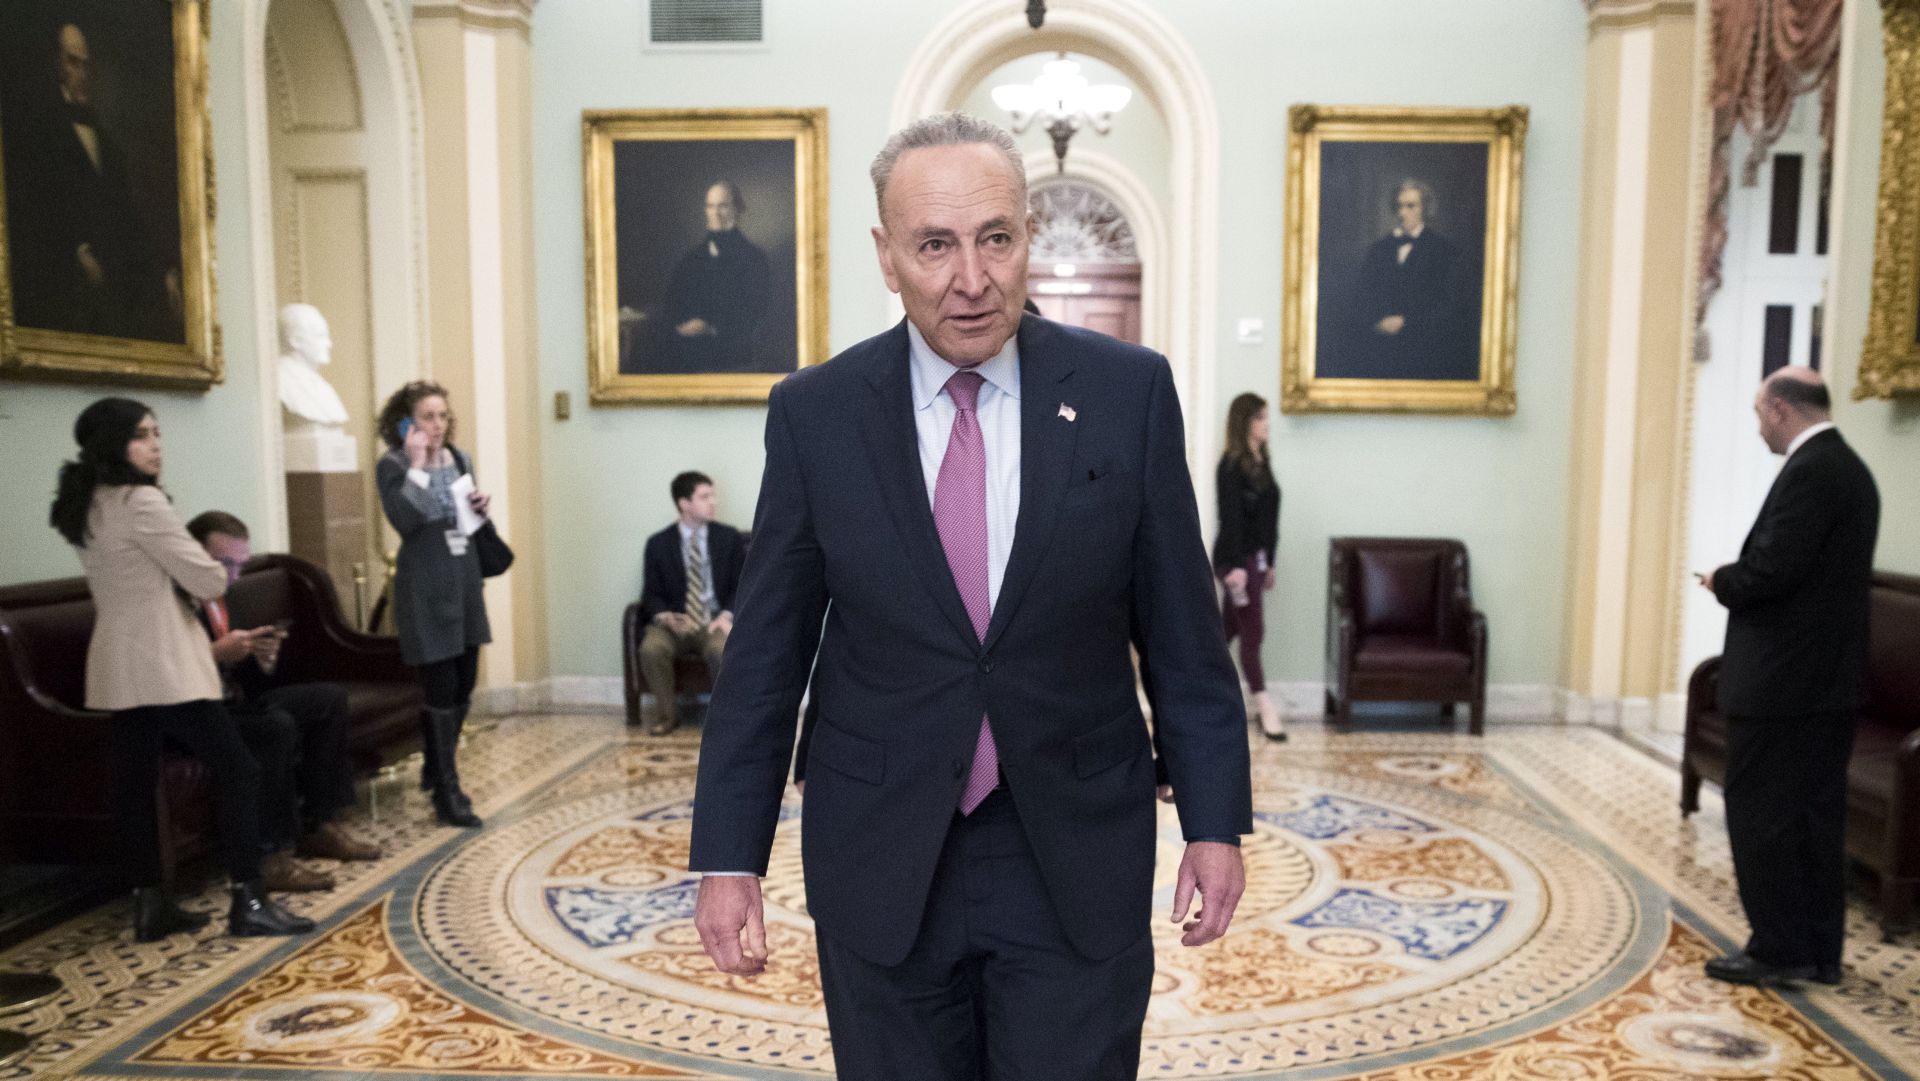 epa06506242 Senate Minority Leader Chuck Schumer walks through the Ohio Clock Corridor just off the Senate floor as negotiations continue in the US Capitol in Washington, DC, USA, 08 February 2018. The Senate will vote today on 6 week continuing resolution that will then go to the House for their up or down vote with a government shutdown in the balance.  EPA/SHAWN THEW